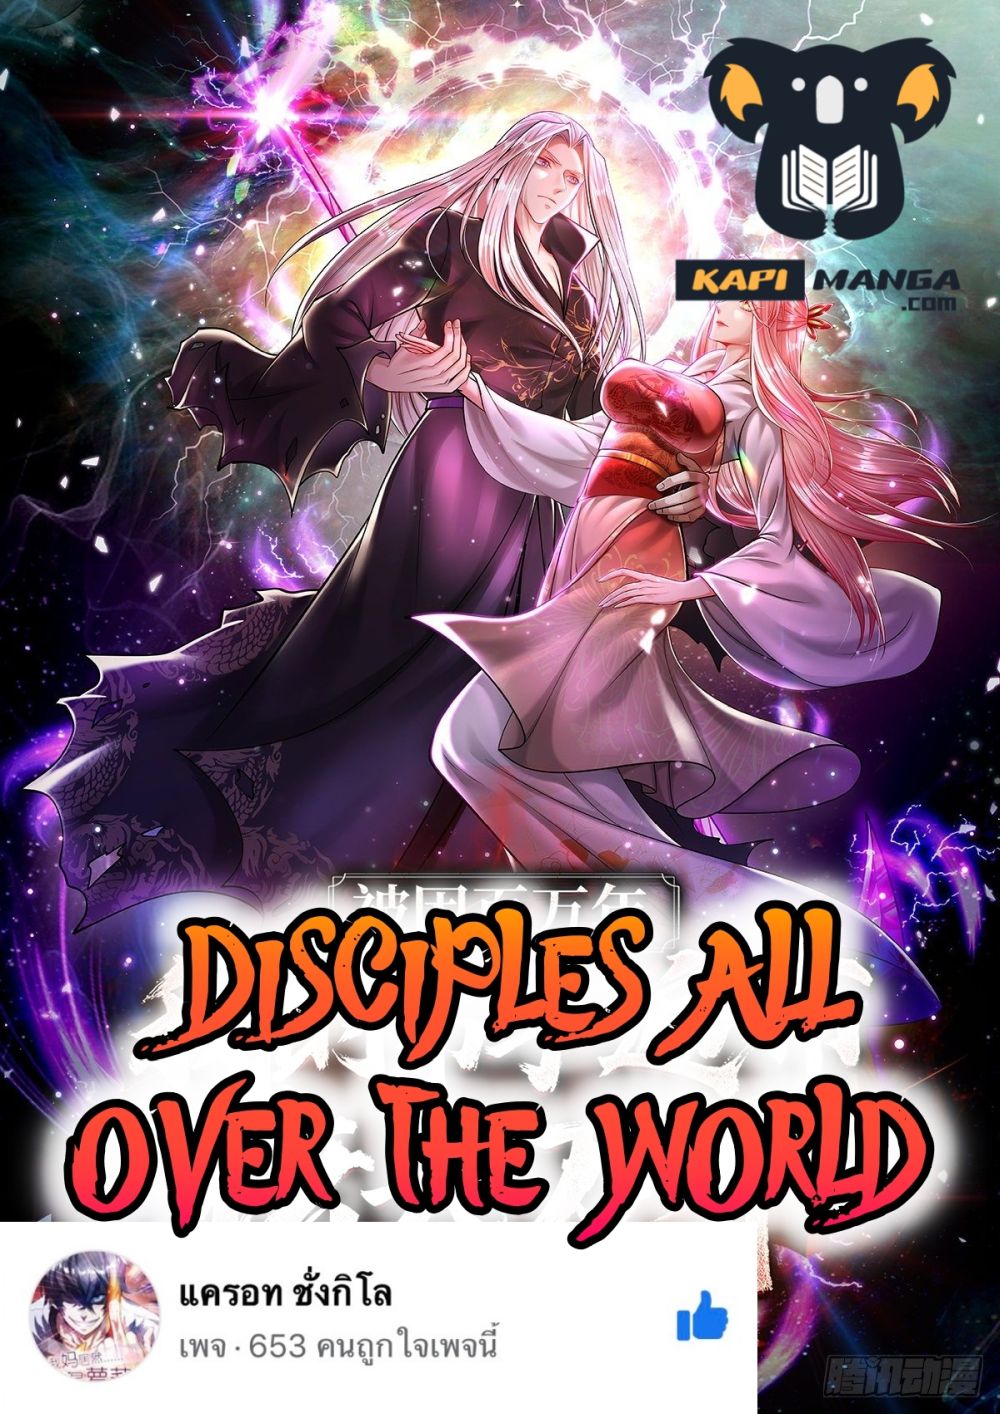 Disciples All Over the World à¸à¸­à¸à¸à¸µà¹ 52 (1)